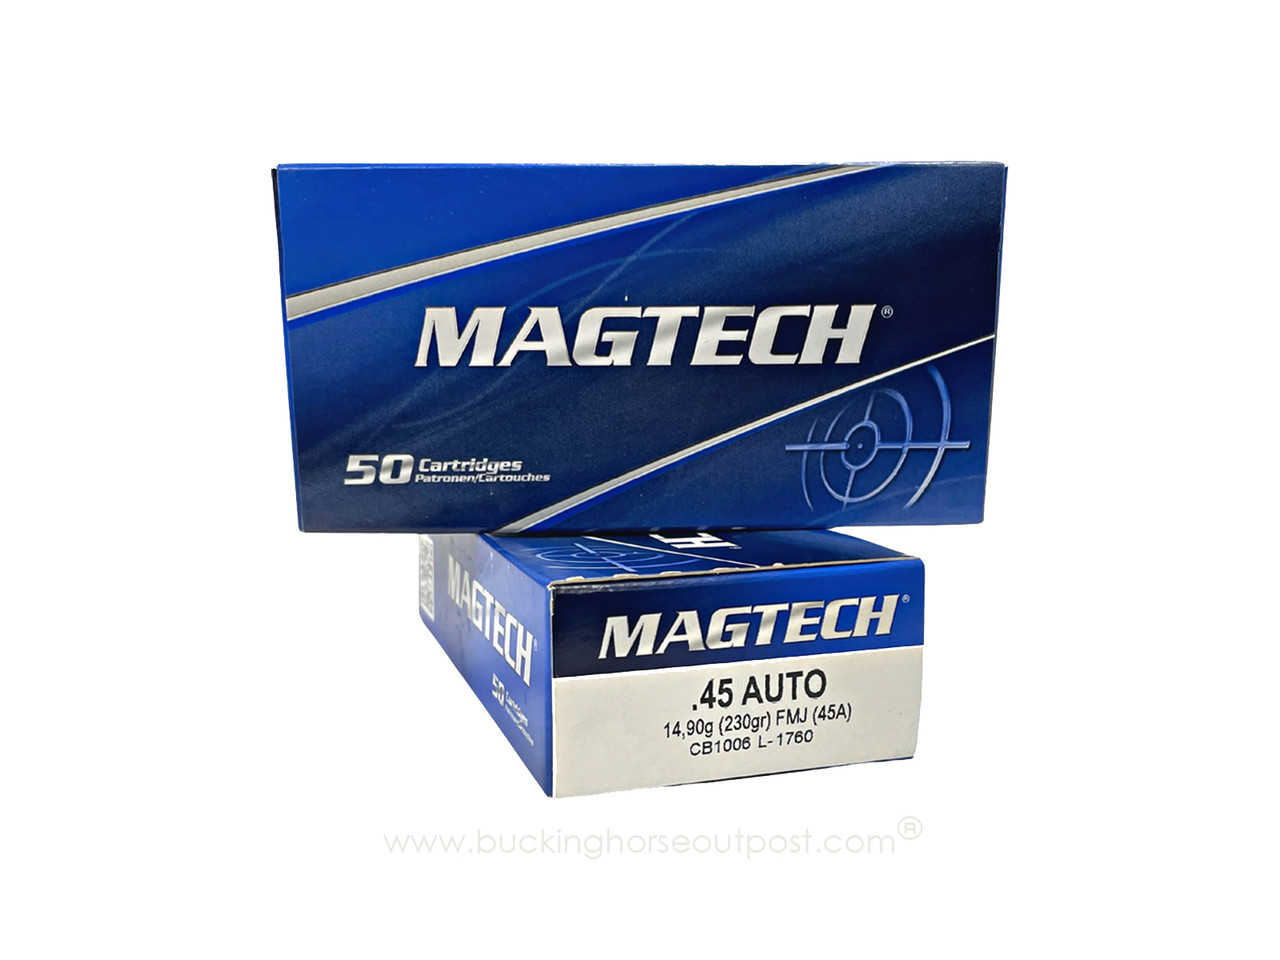 Magtech .45 Auto 230 Grain Full Metal Jacket 50rds Per Box (45A)- FREE SHIPPING ON ORDERS OVER $175